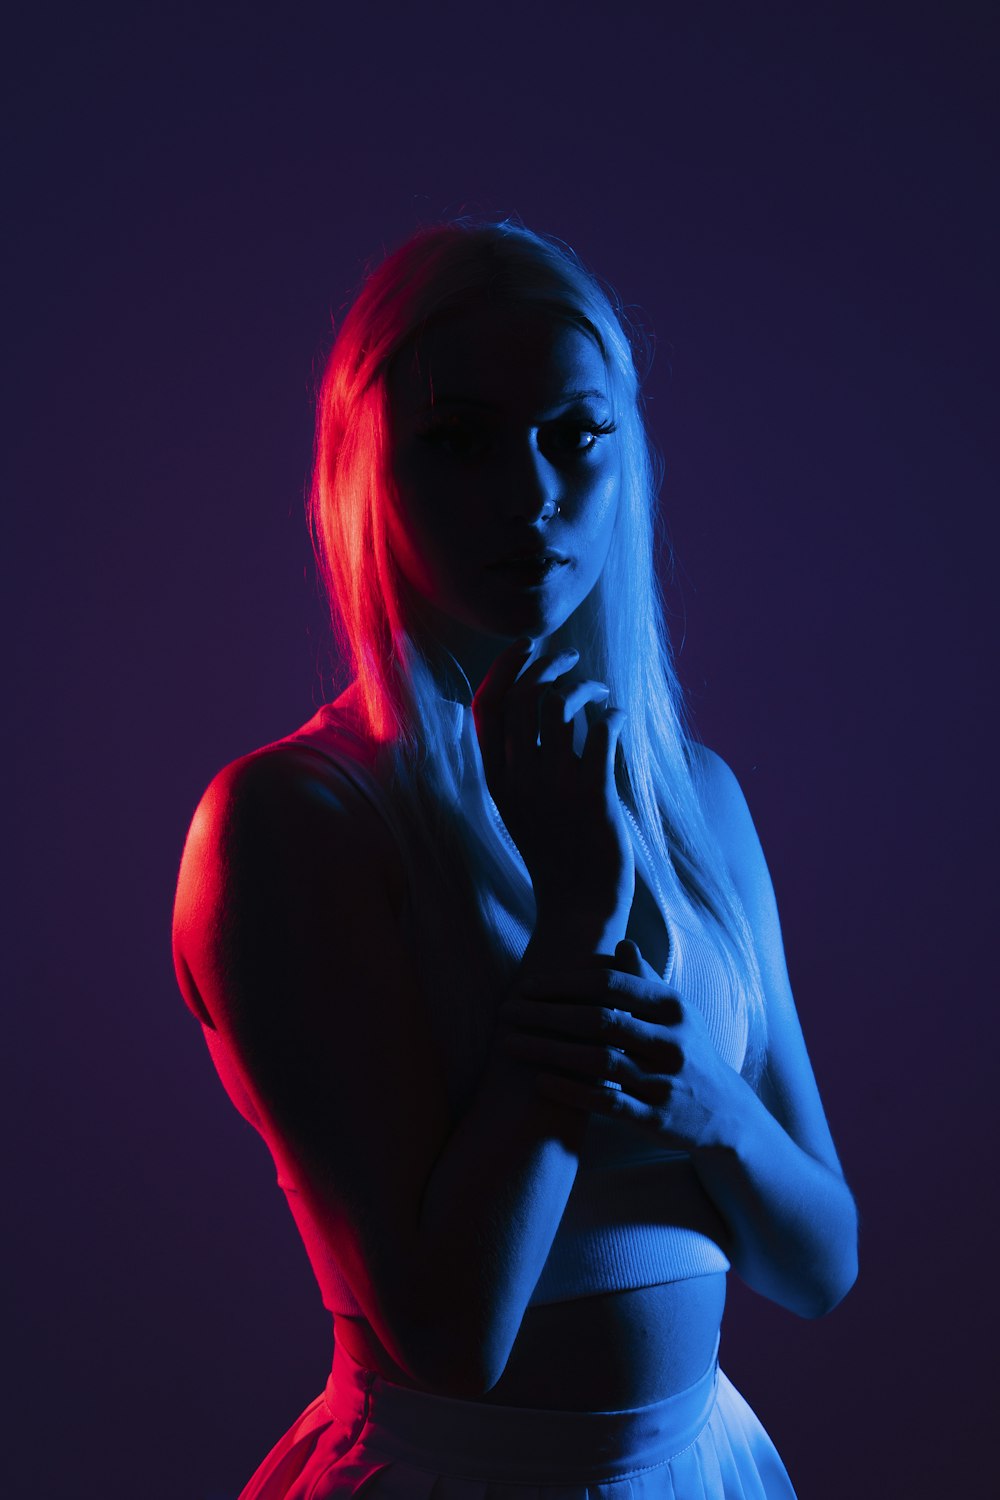 a person wearing a blue light in a dark room